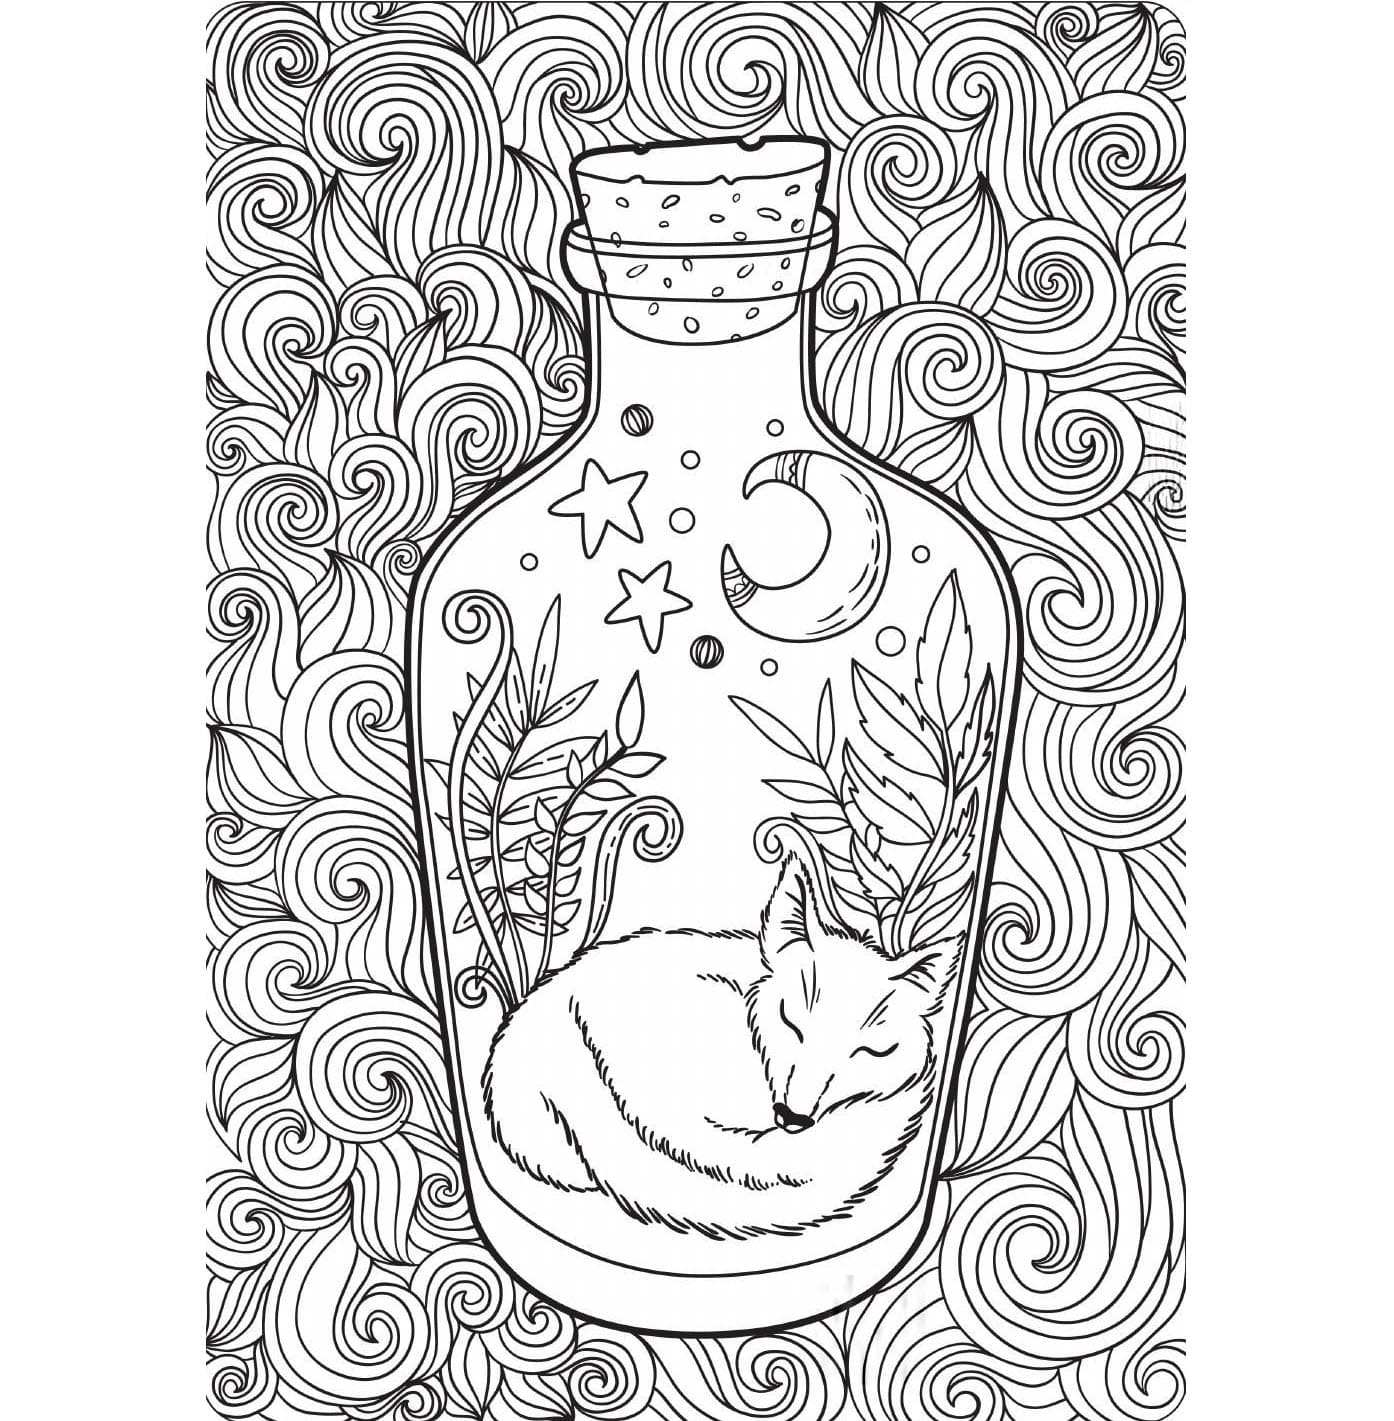 Incroyable Anti-stress coloring page